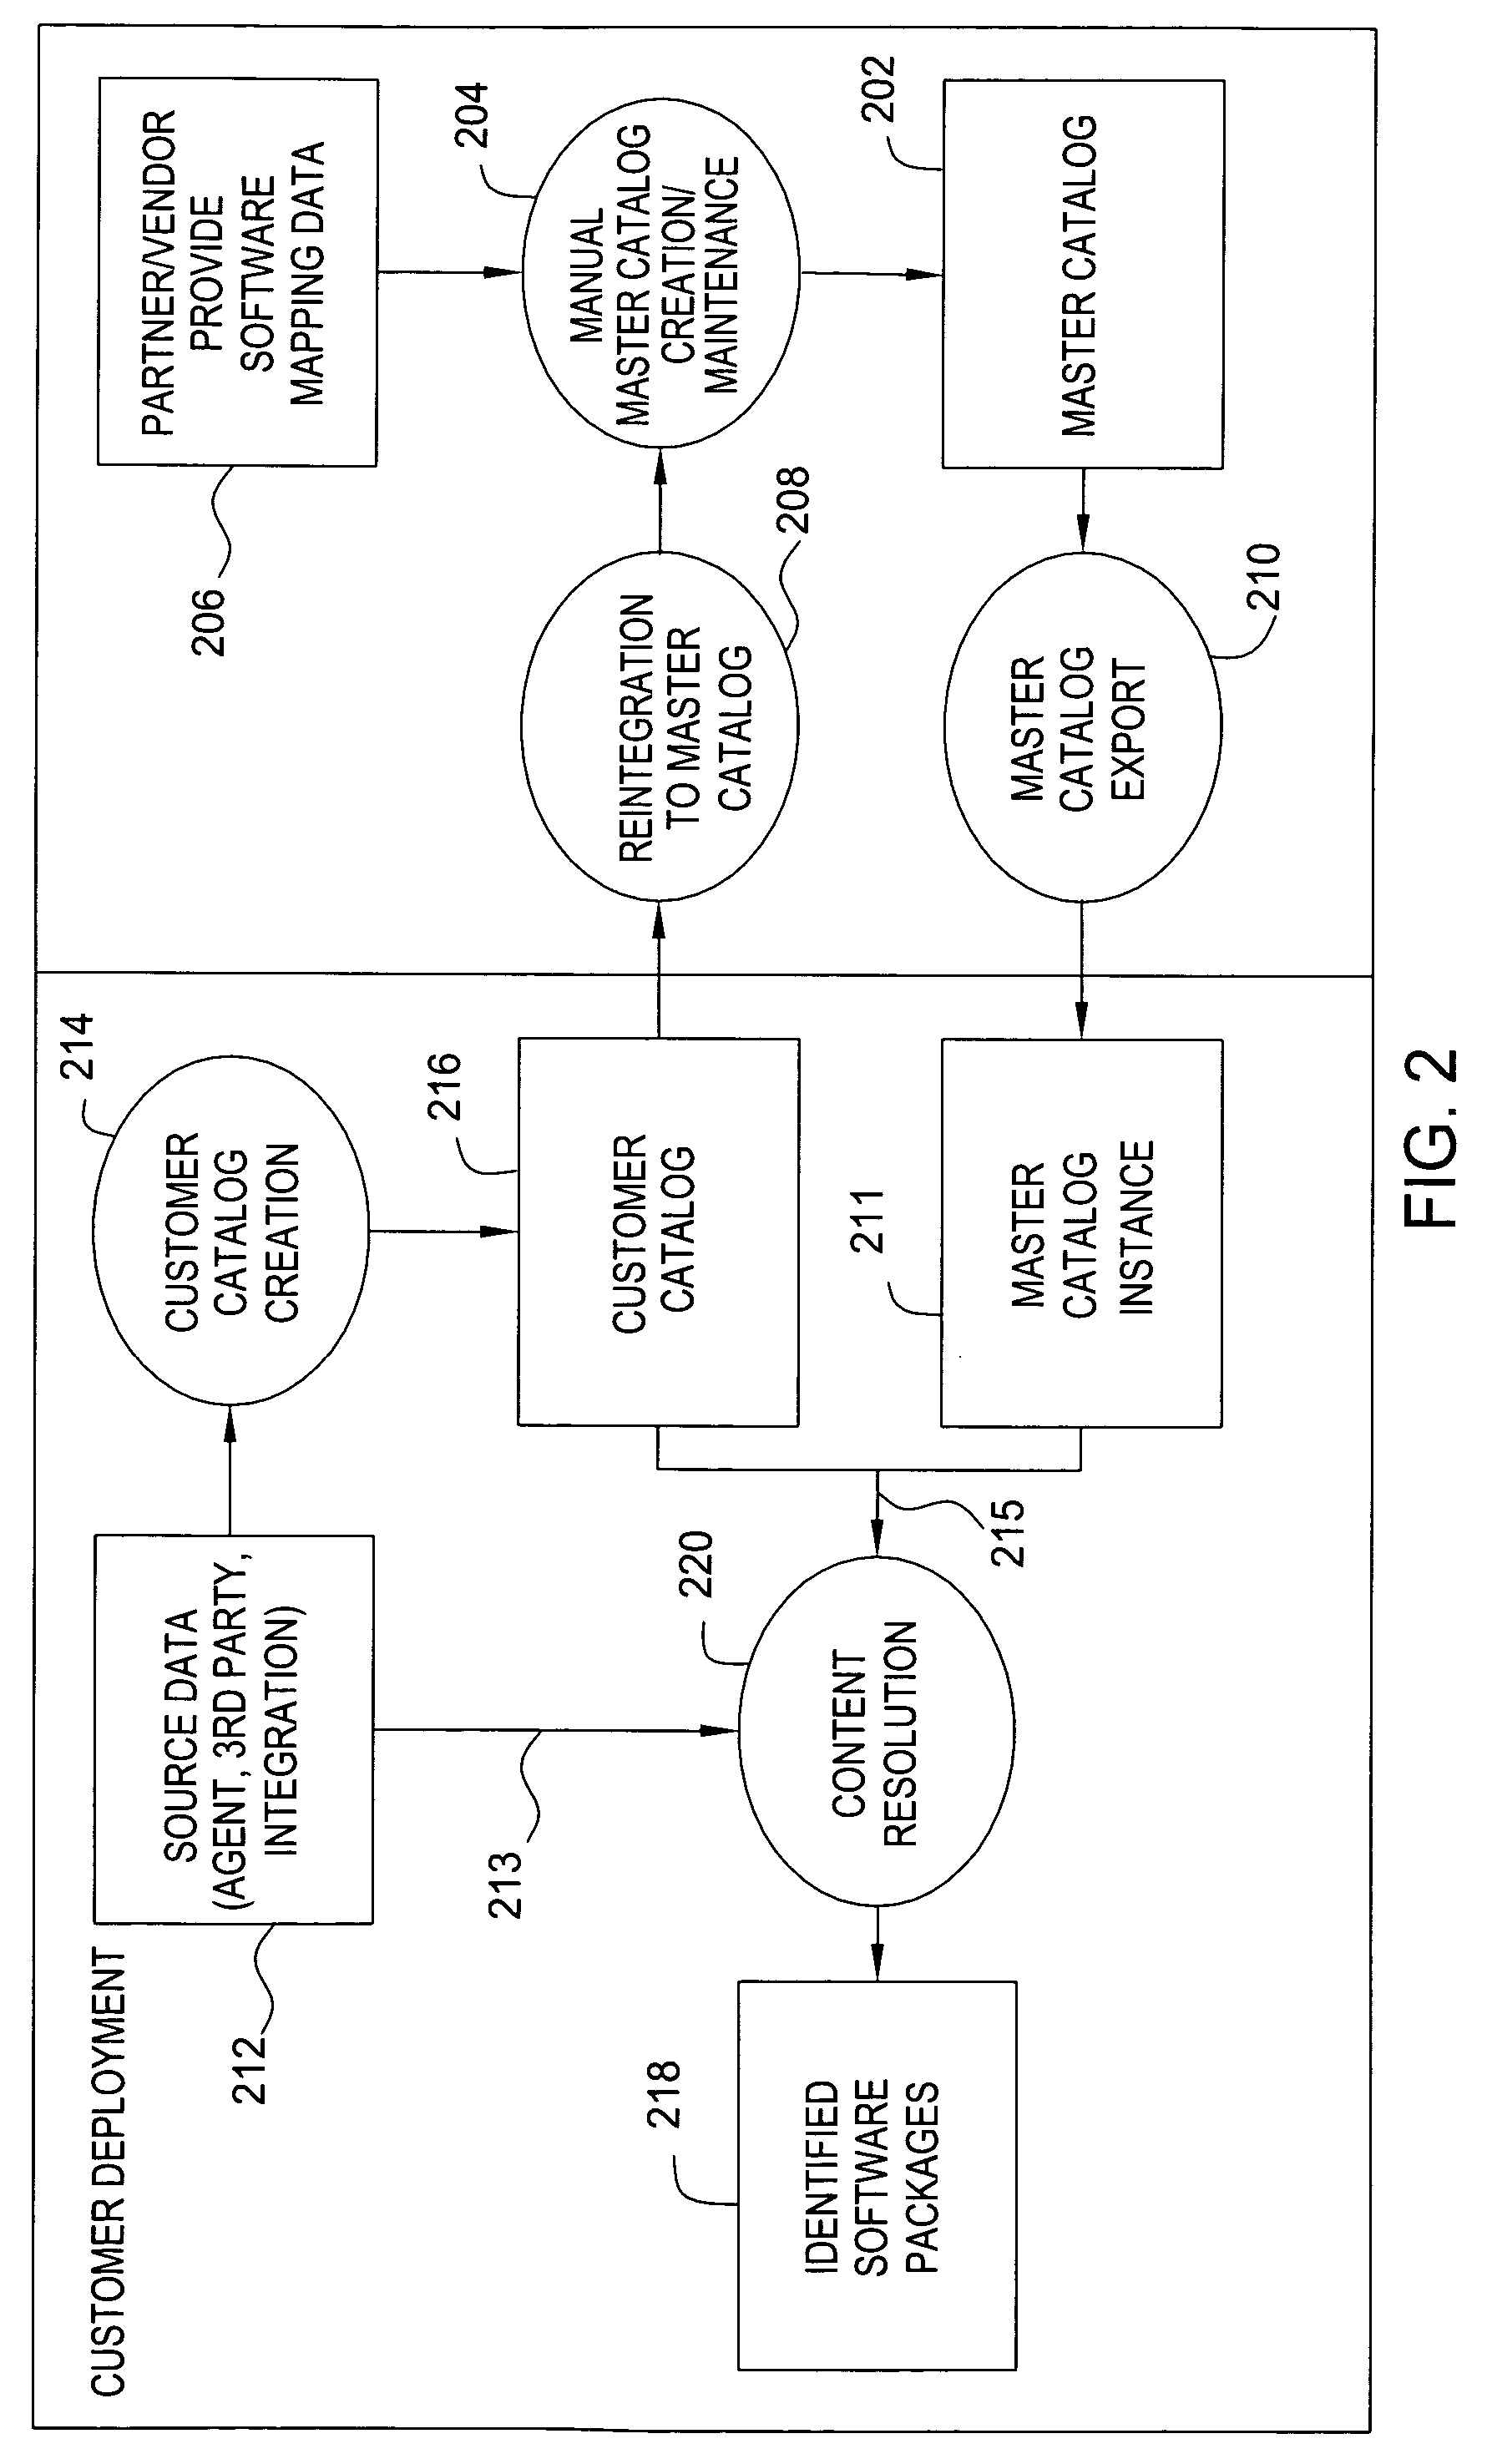 Method and apparatus for identifying and cataloging software assets